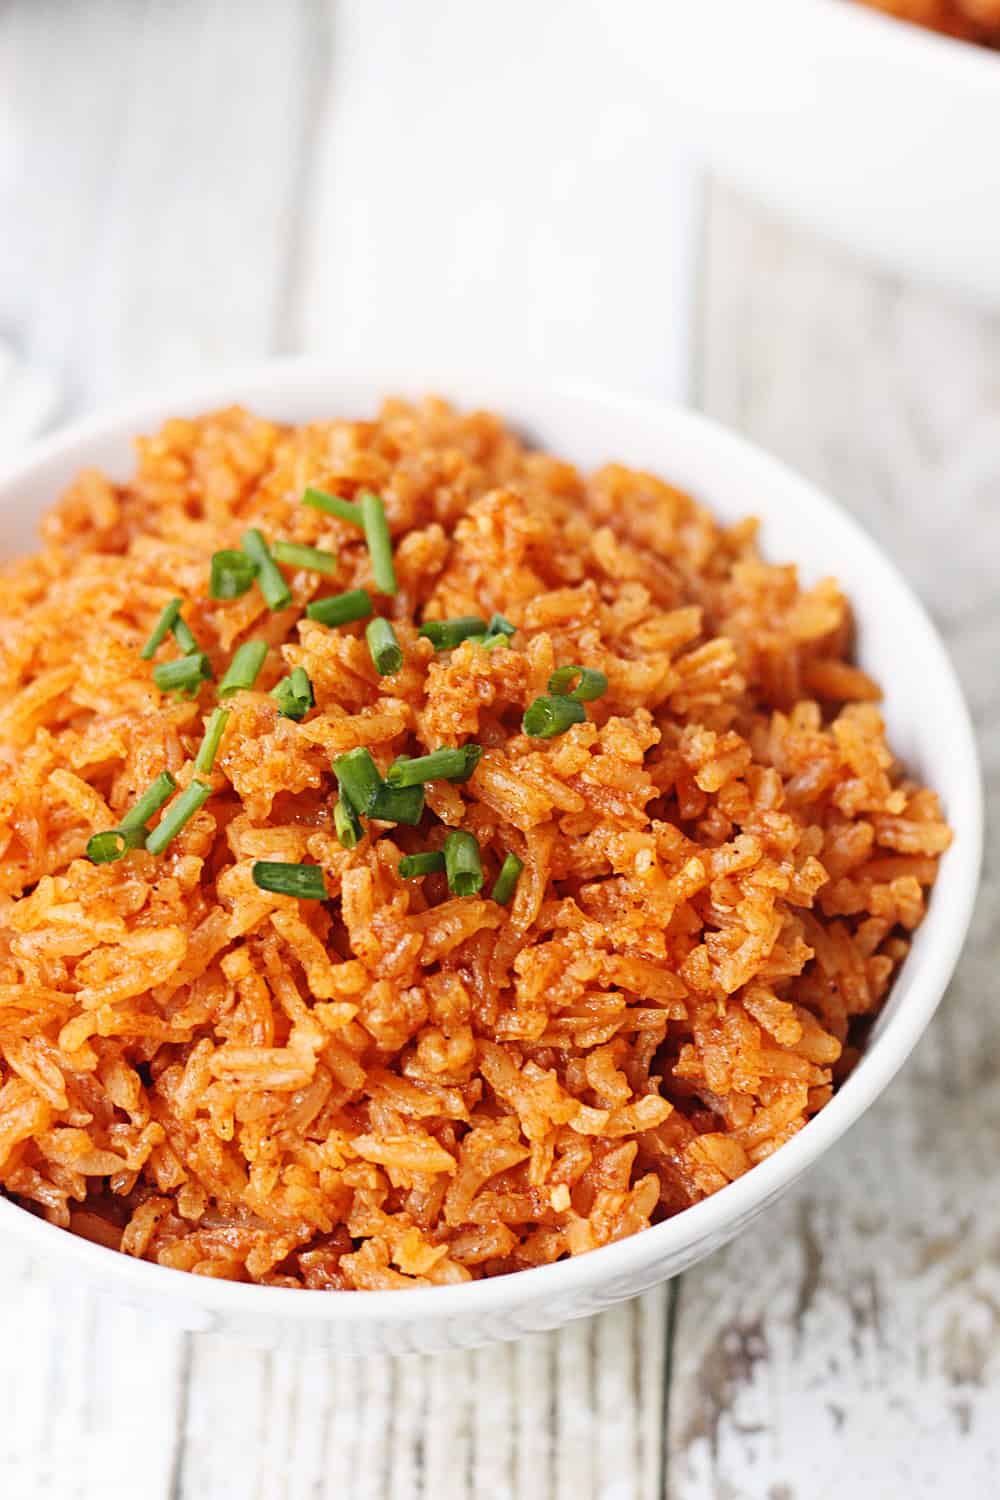 https://www.halfscratched.com/wp-content/uploads/2018/09/Easy-Instant-Pot-Mexican-Rice-4.jpg